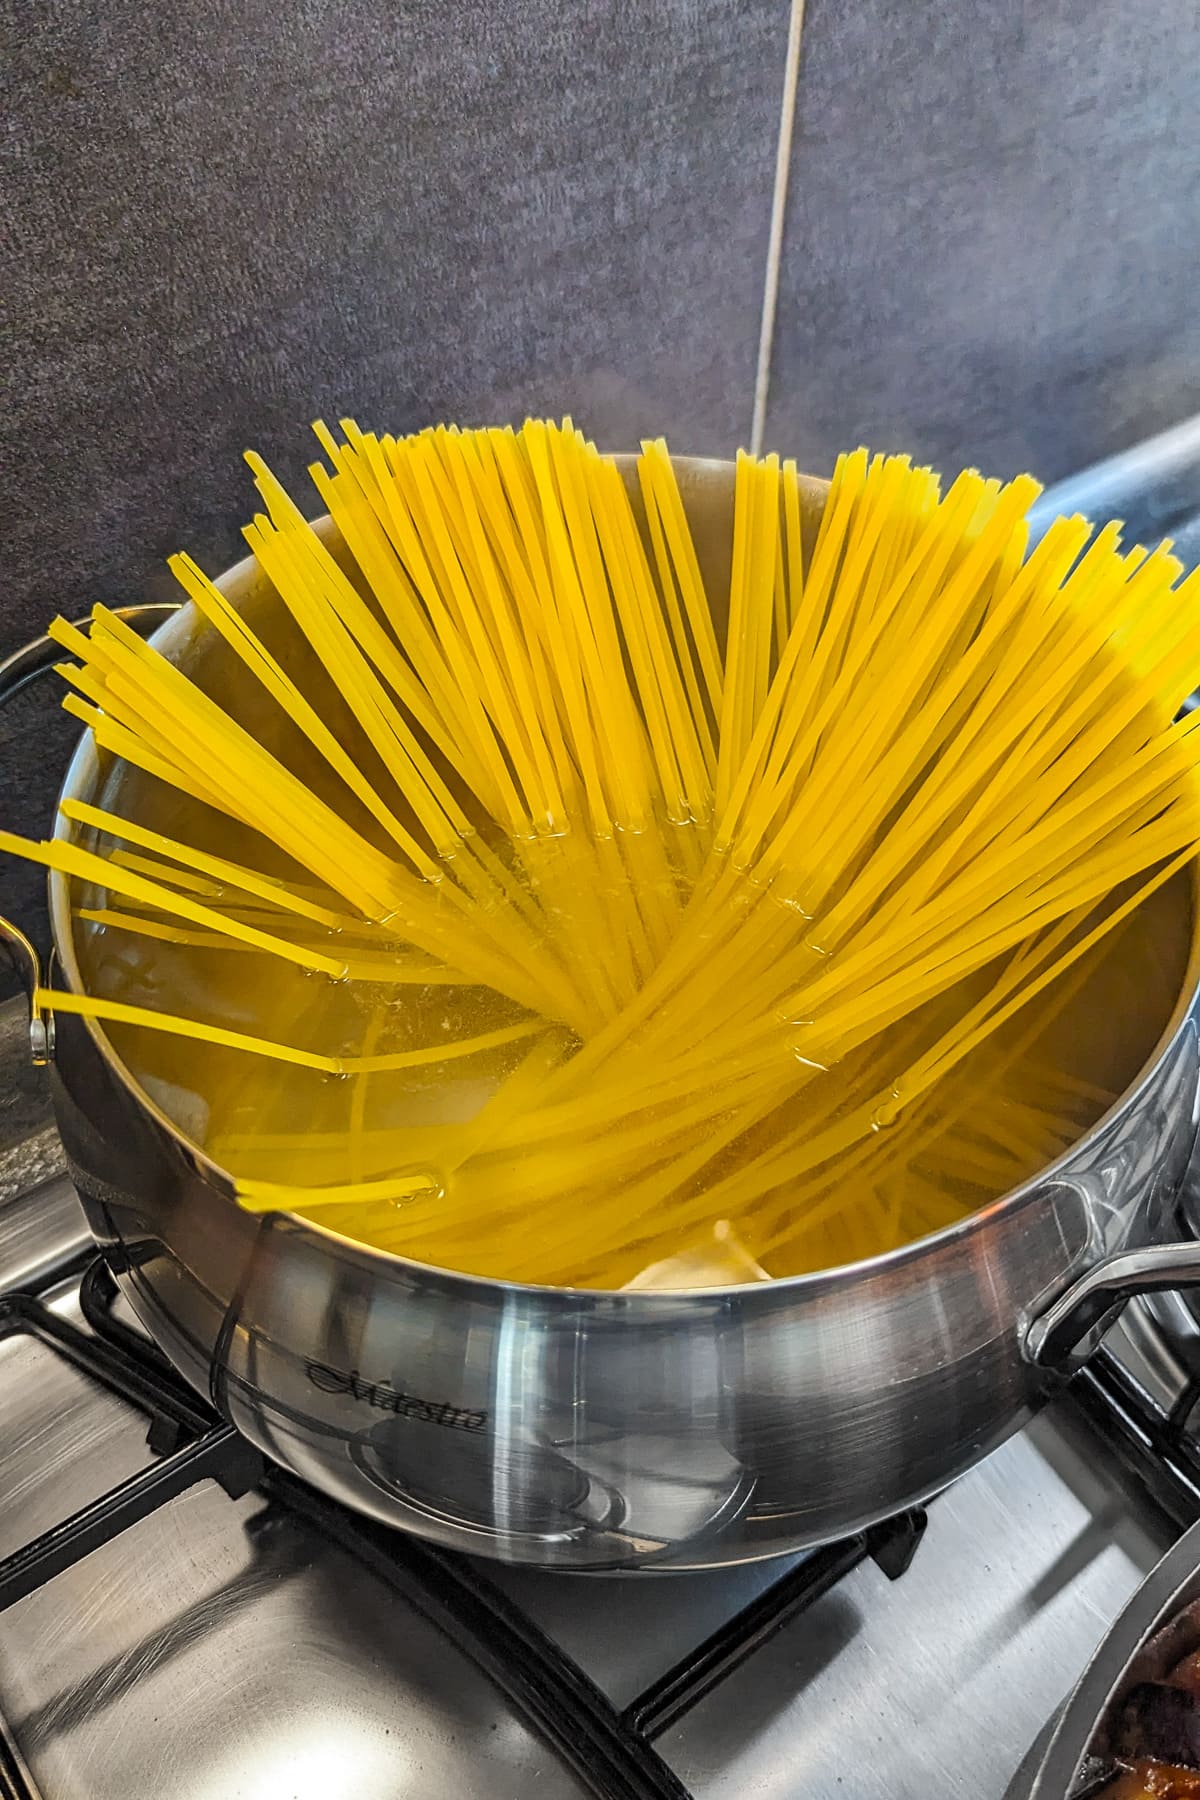 Raw spaghetti in a pot with boiling water on the stove.